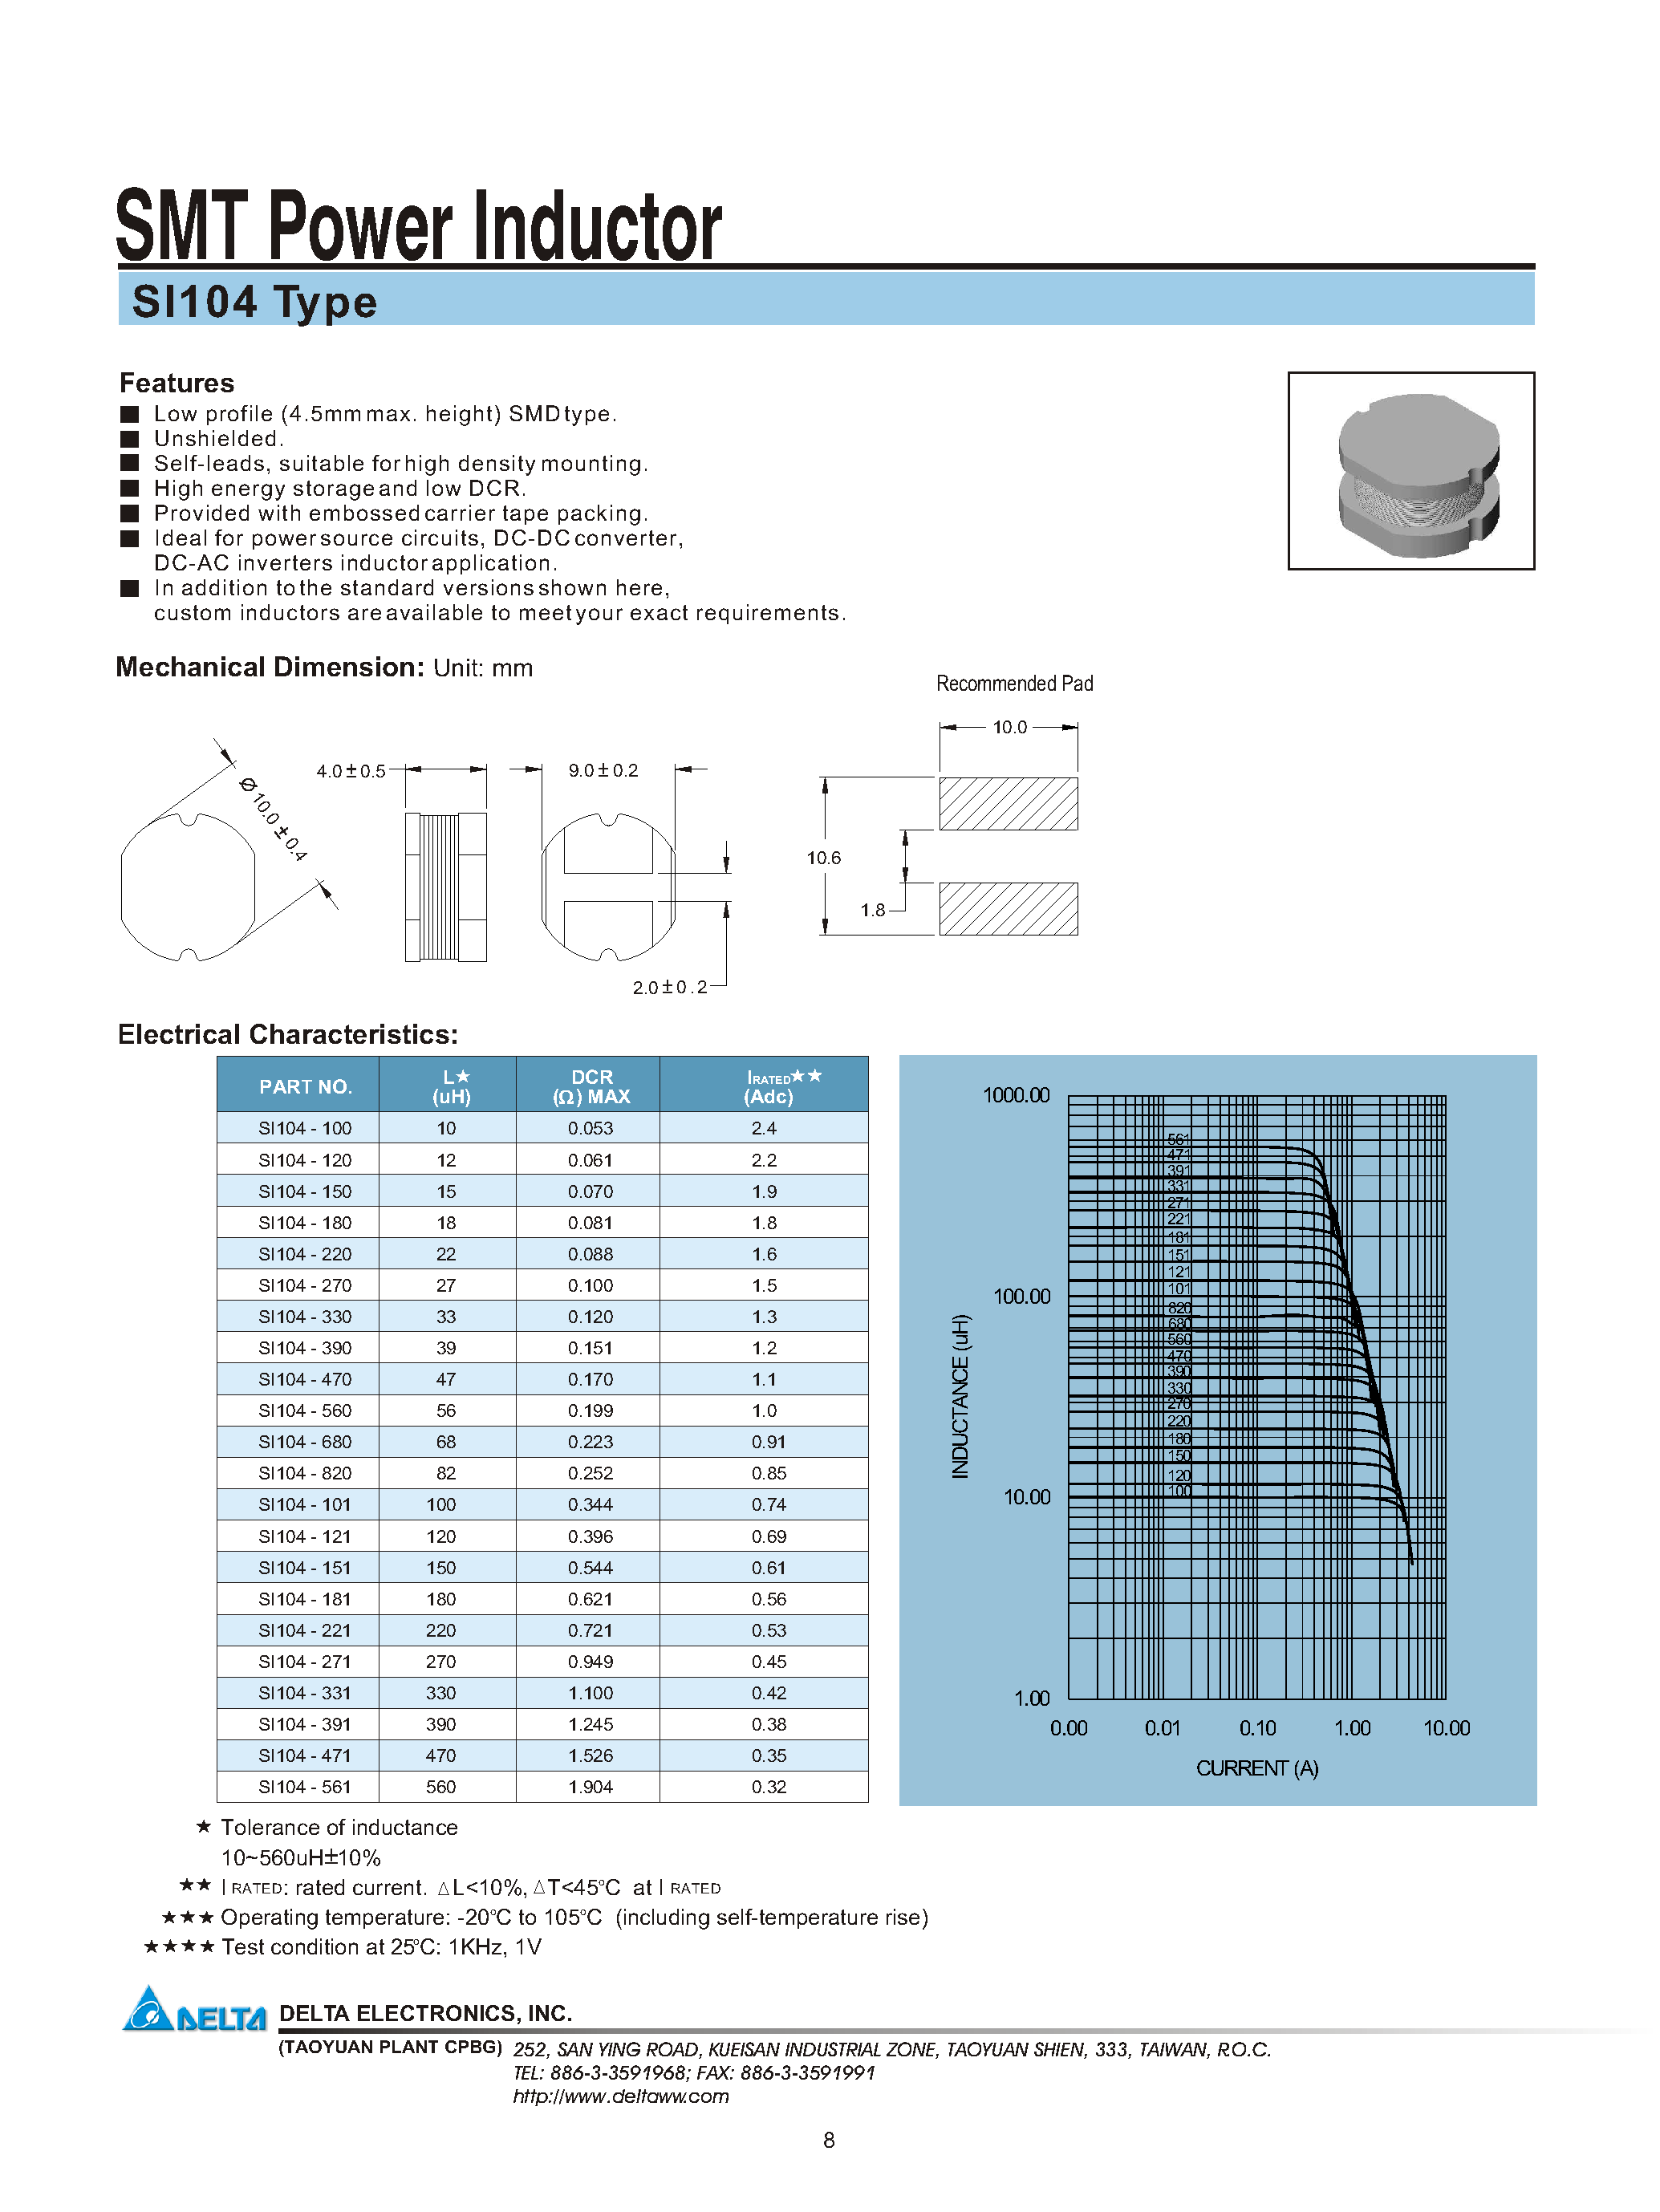 Datasheet SI104-100 - SMT Power Inductor page 1